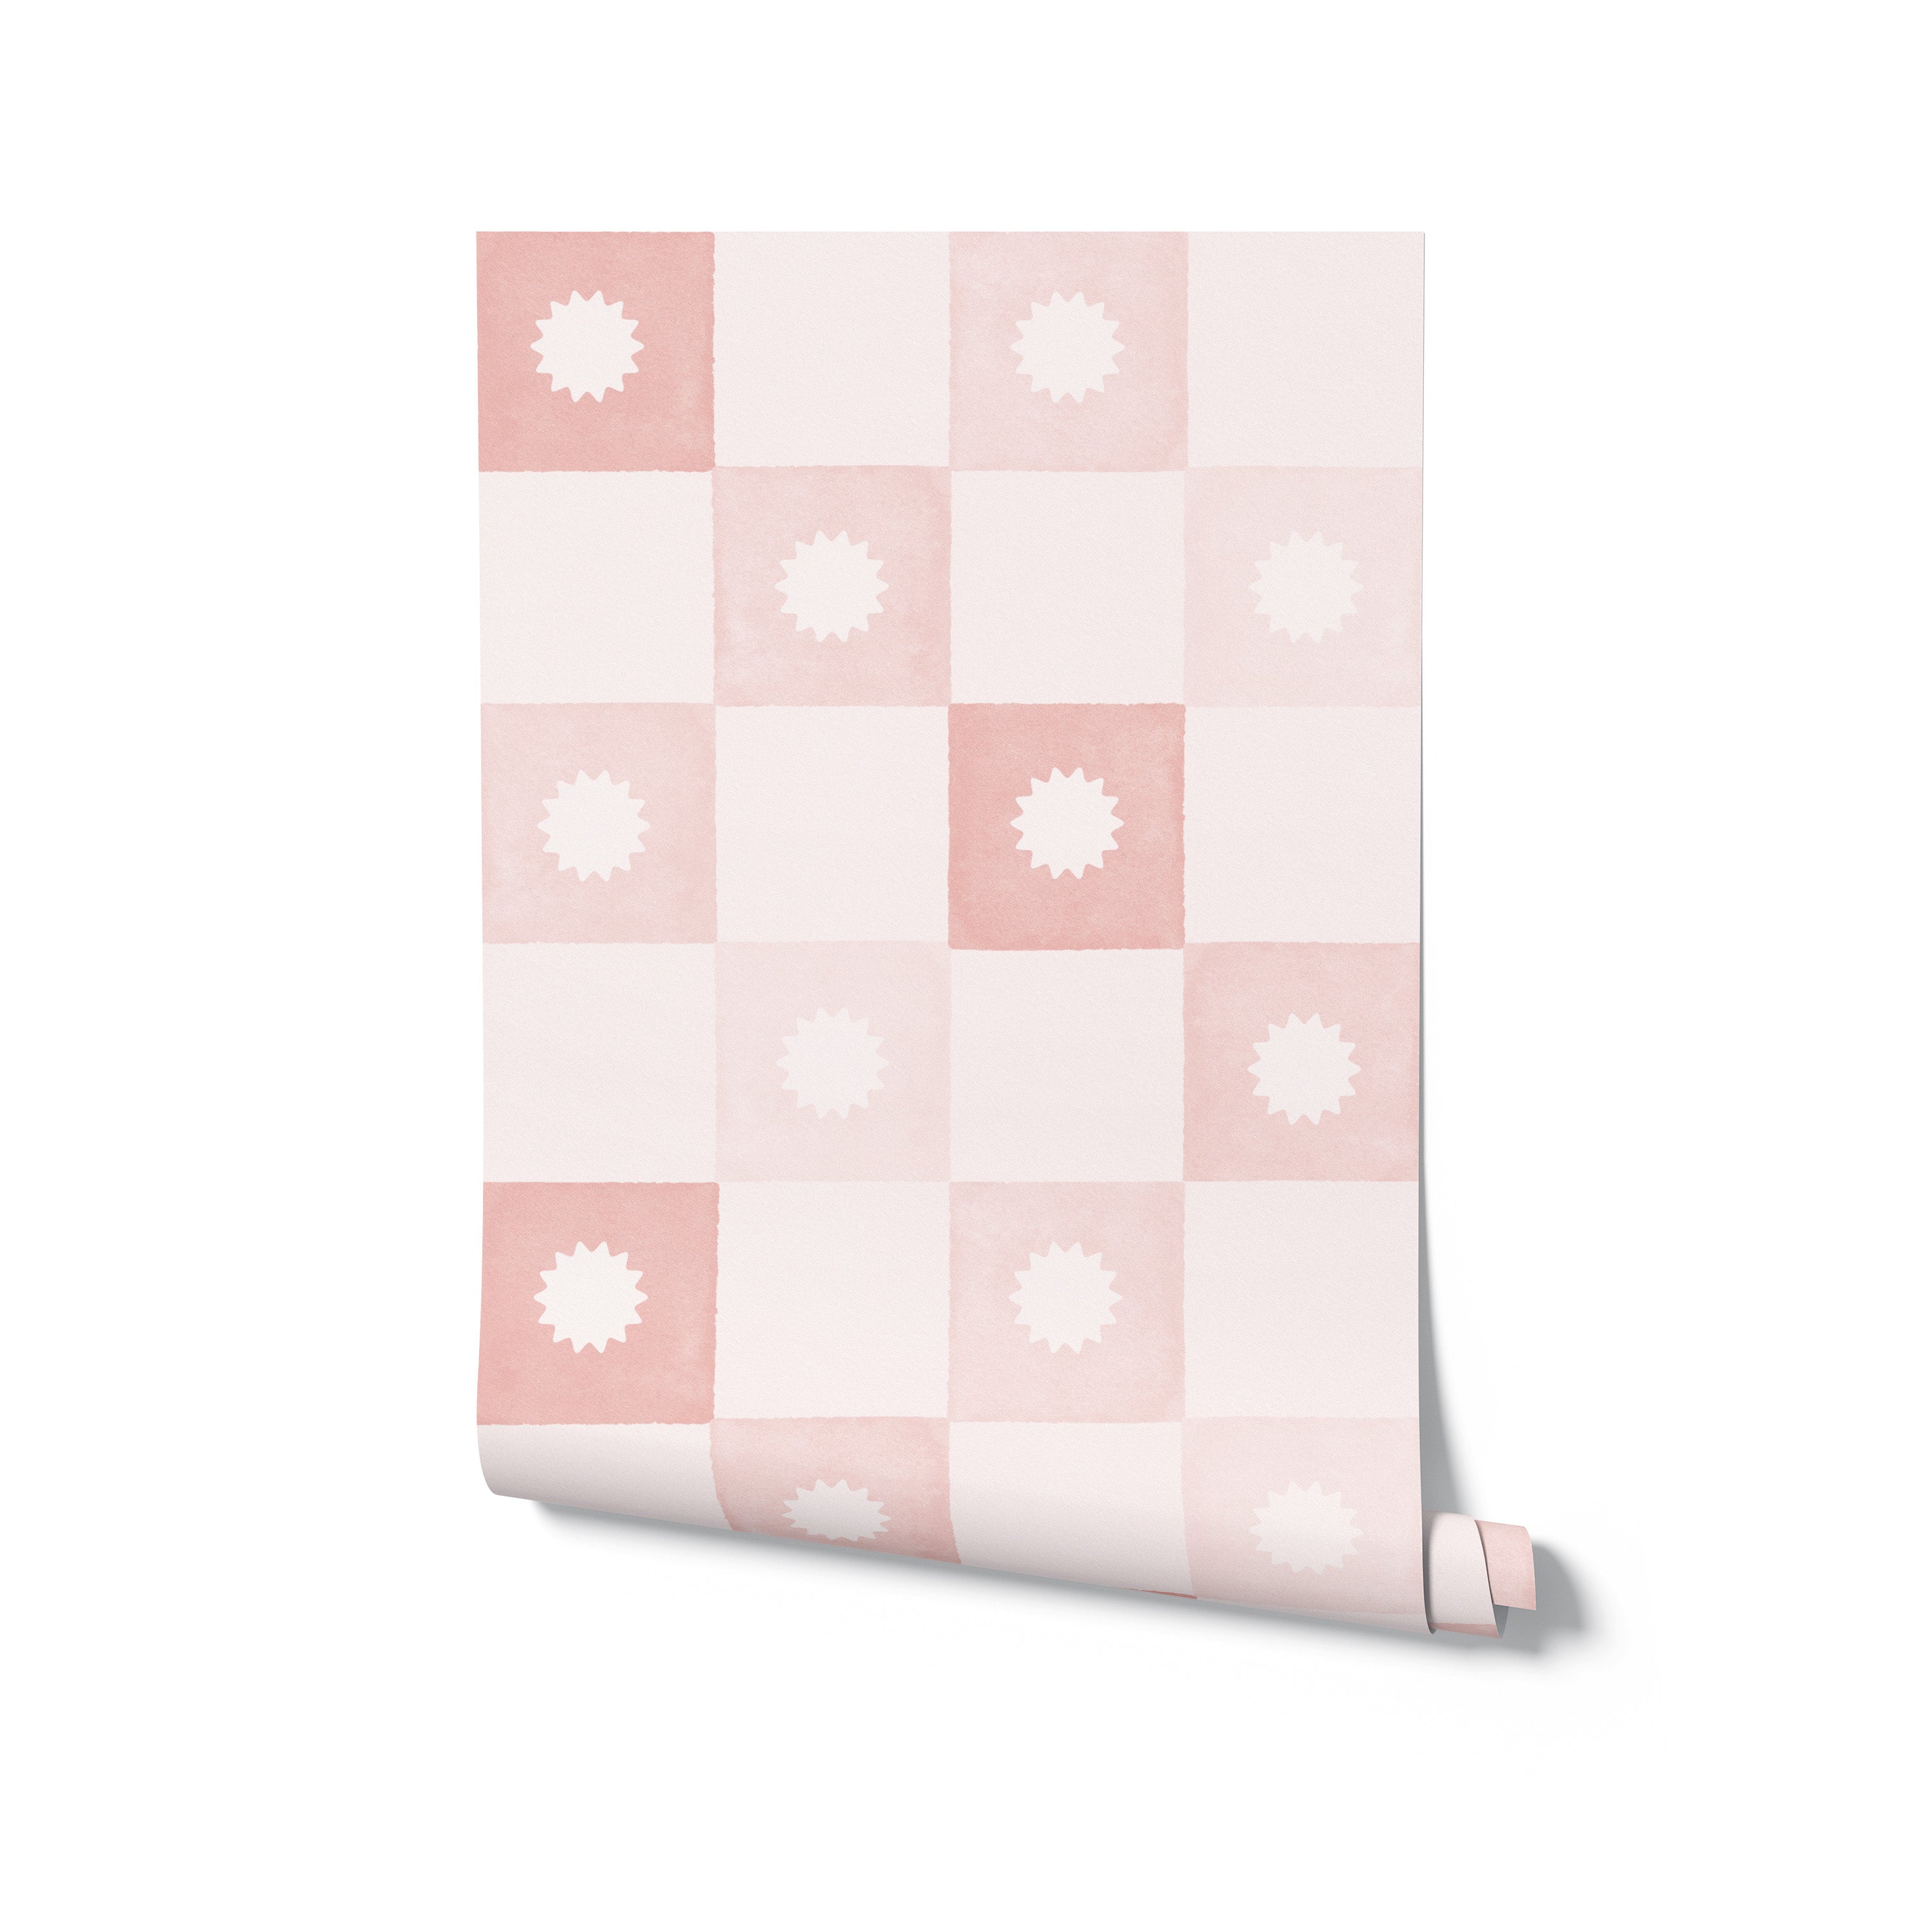 A roll of Coralie Wallpaper in Dusty Pink unrolled slightly to show off its distinctive checkered pattern with delicate starburst designs in each square, perfect for adding a playful yet sophisticated touch to interior spaces.